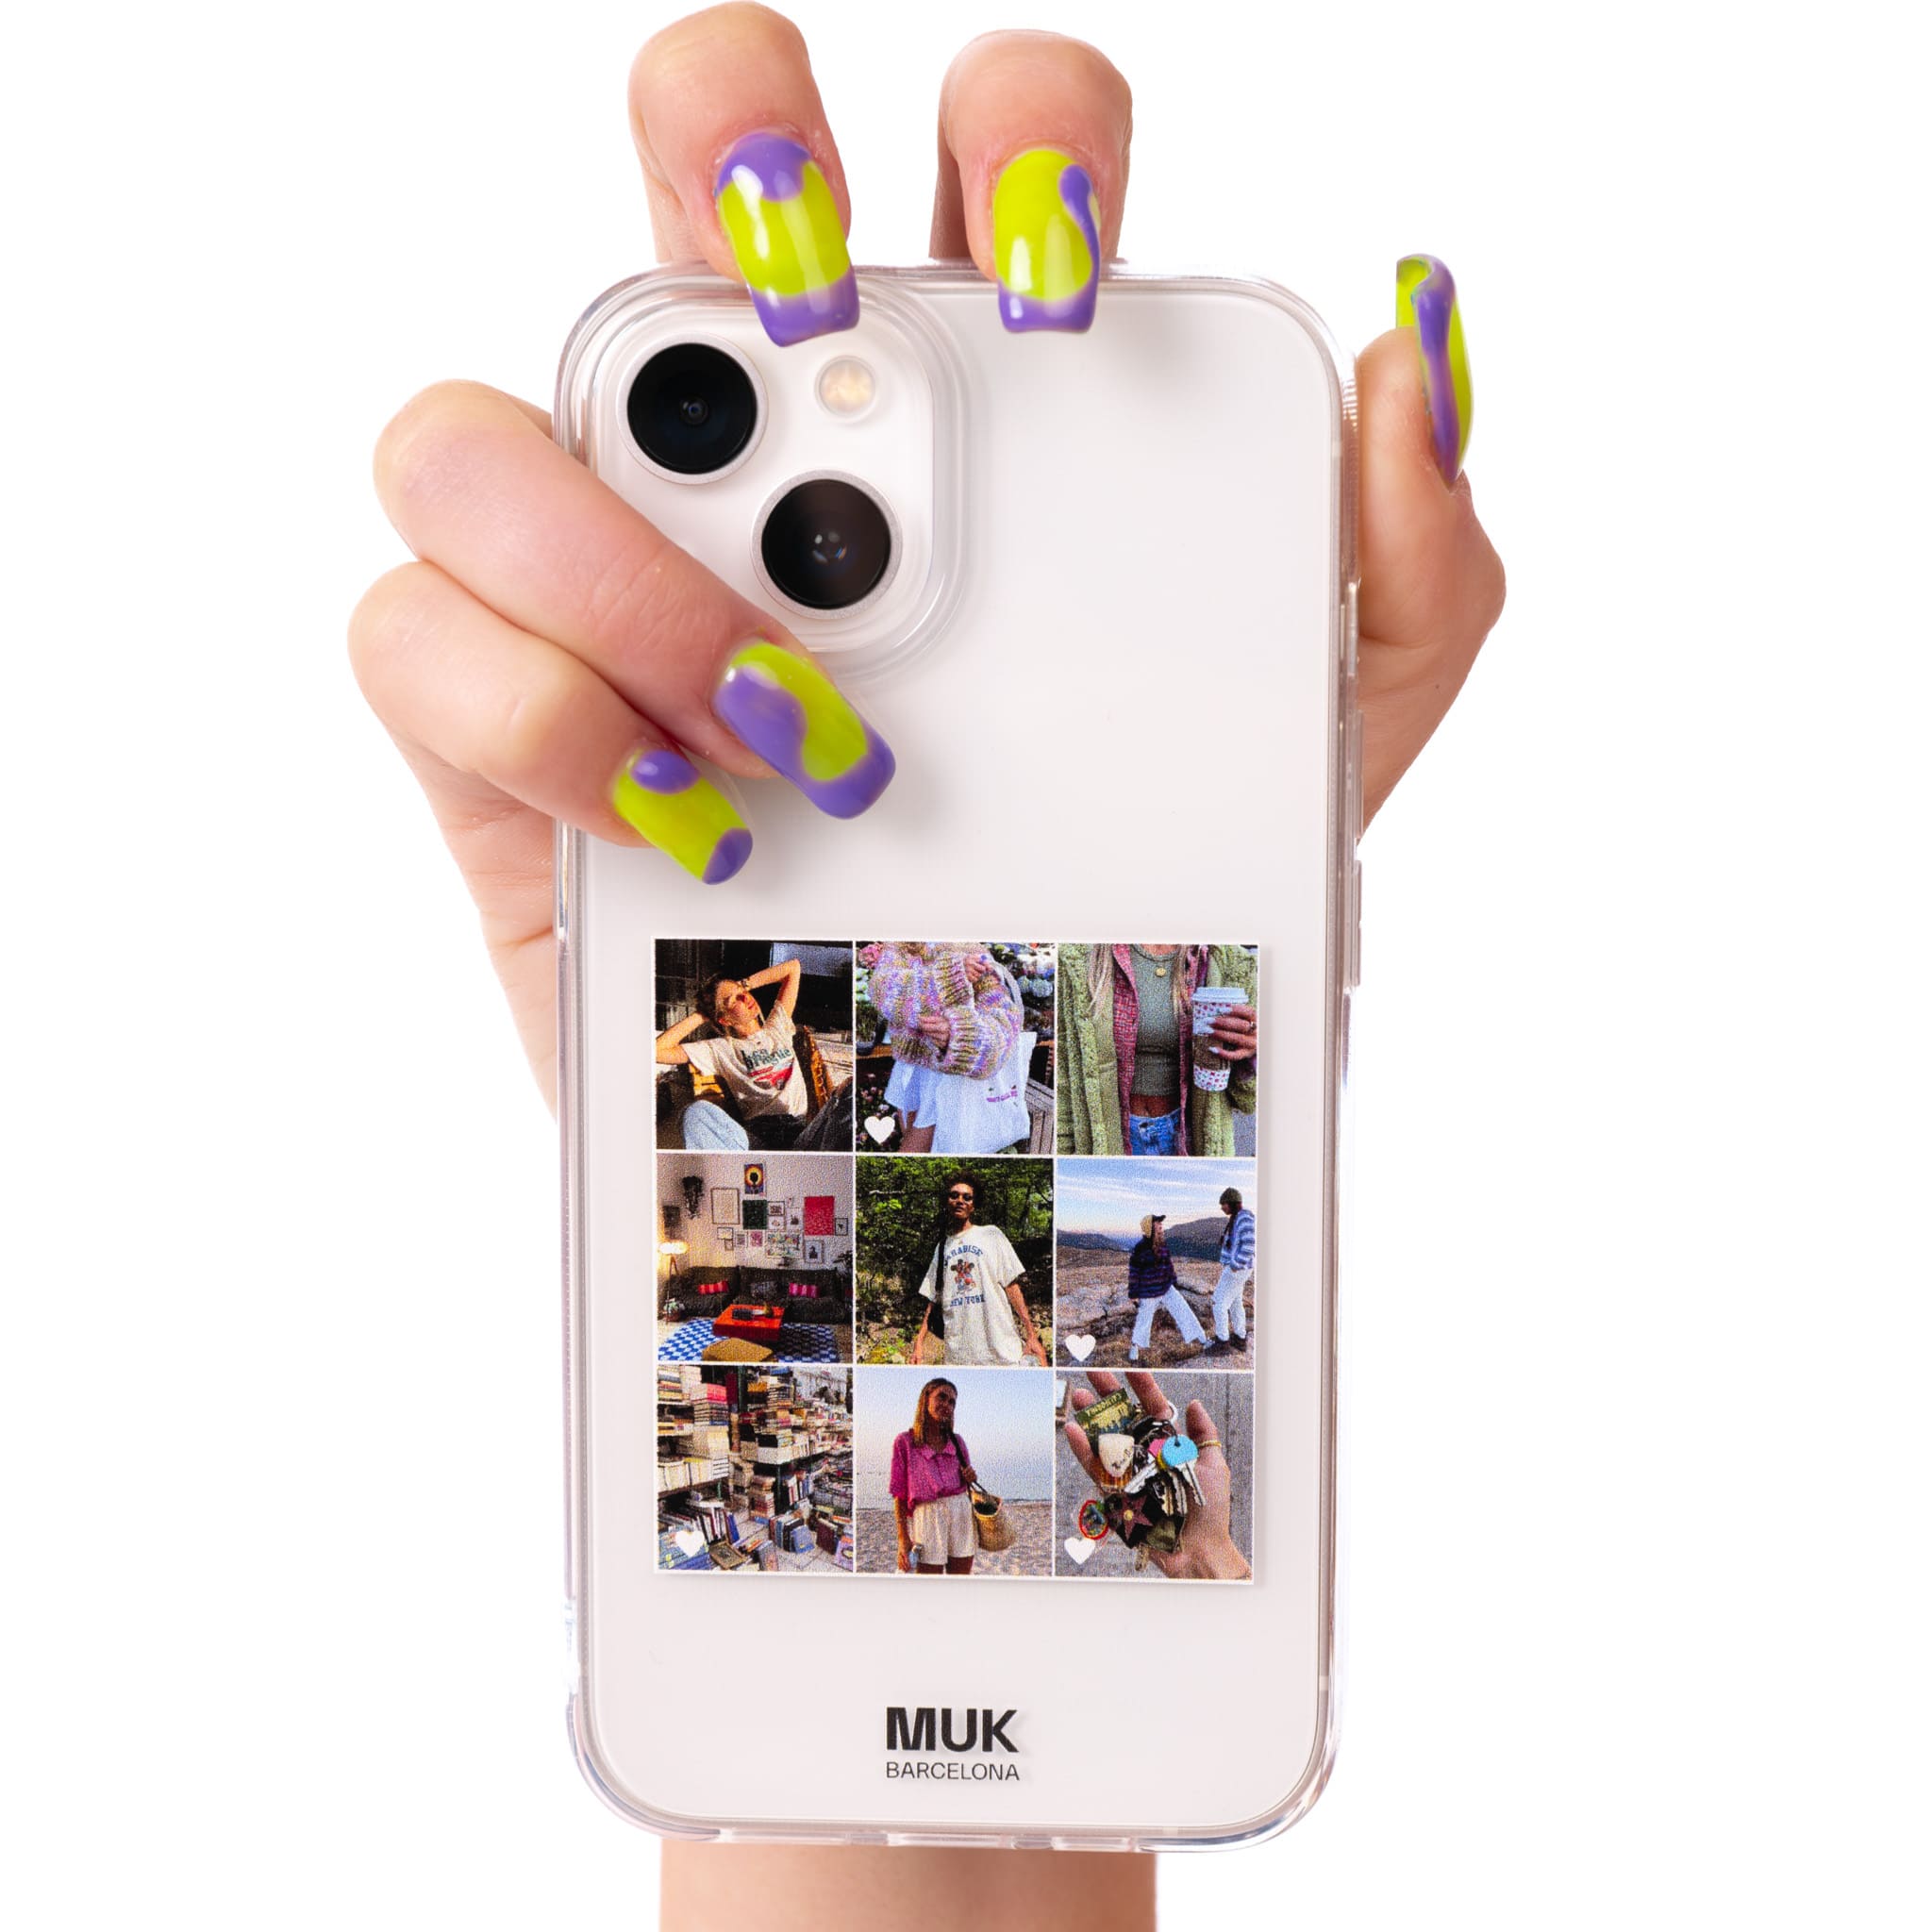  Personalized transparent mobile phone case Collage Grid 9 photos. Remix your favorite moments.
